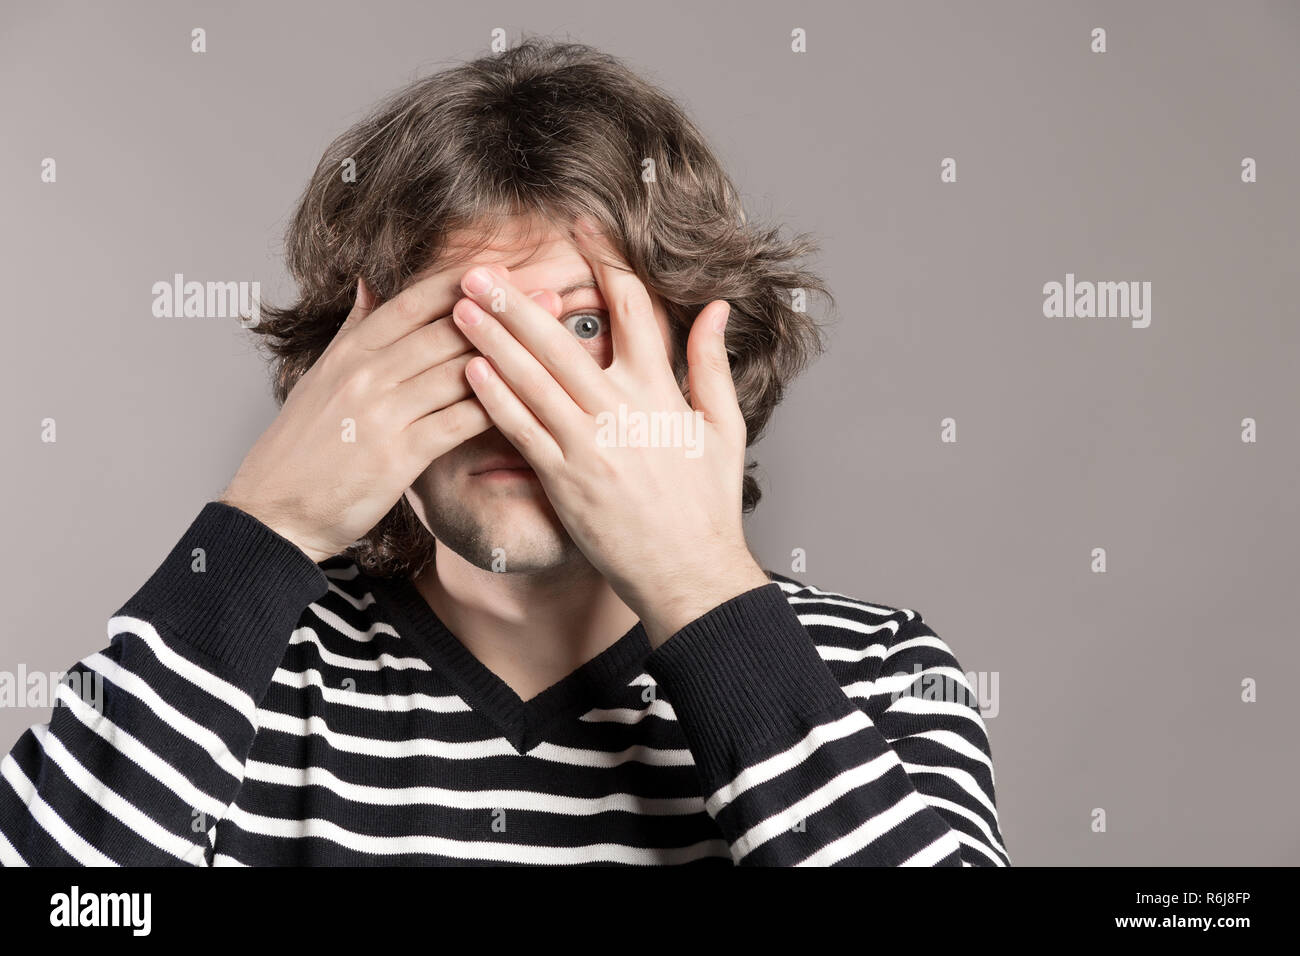 Young hipster man peeking through fingers. Shaggy male covers face with both hands, has frightened expression as notices something terrible or scarying over grey background. Embarrassed expression Stock Photo